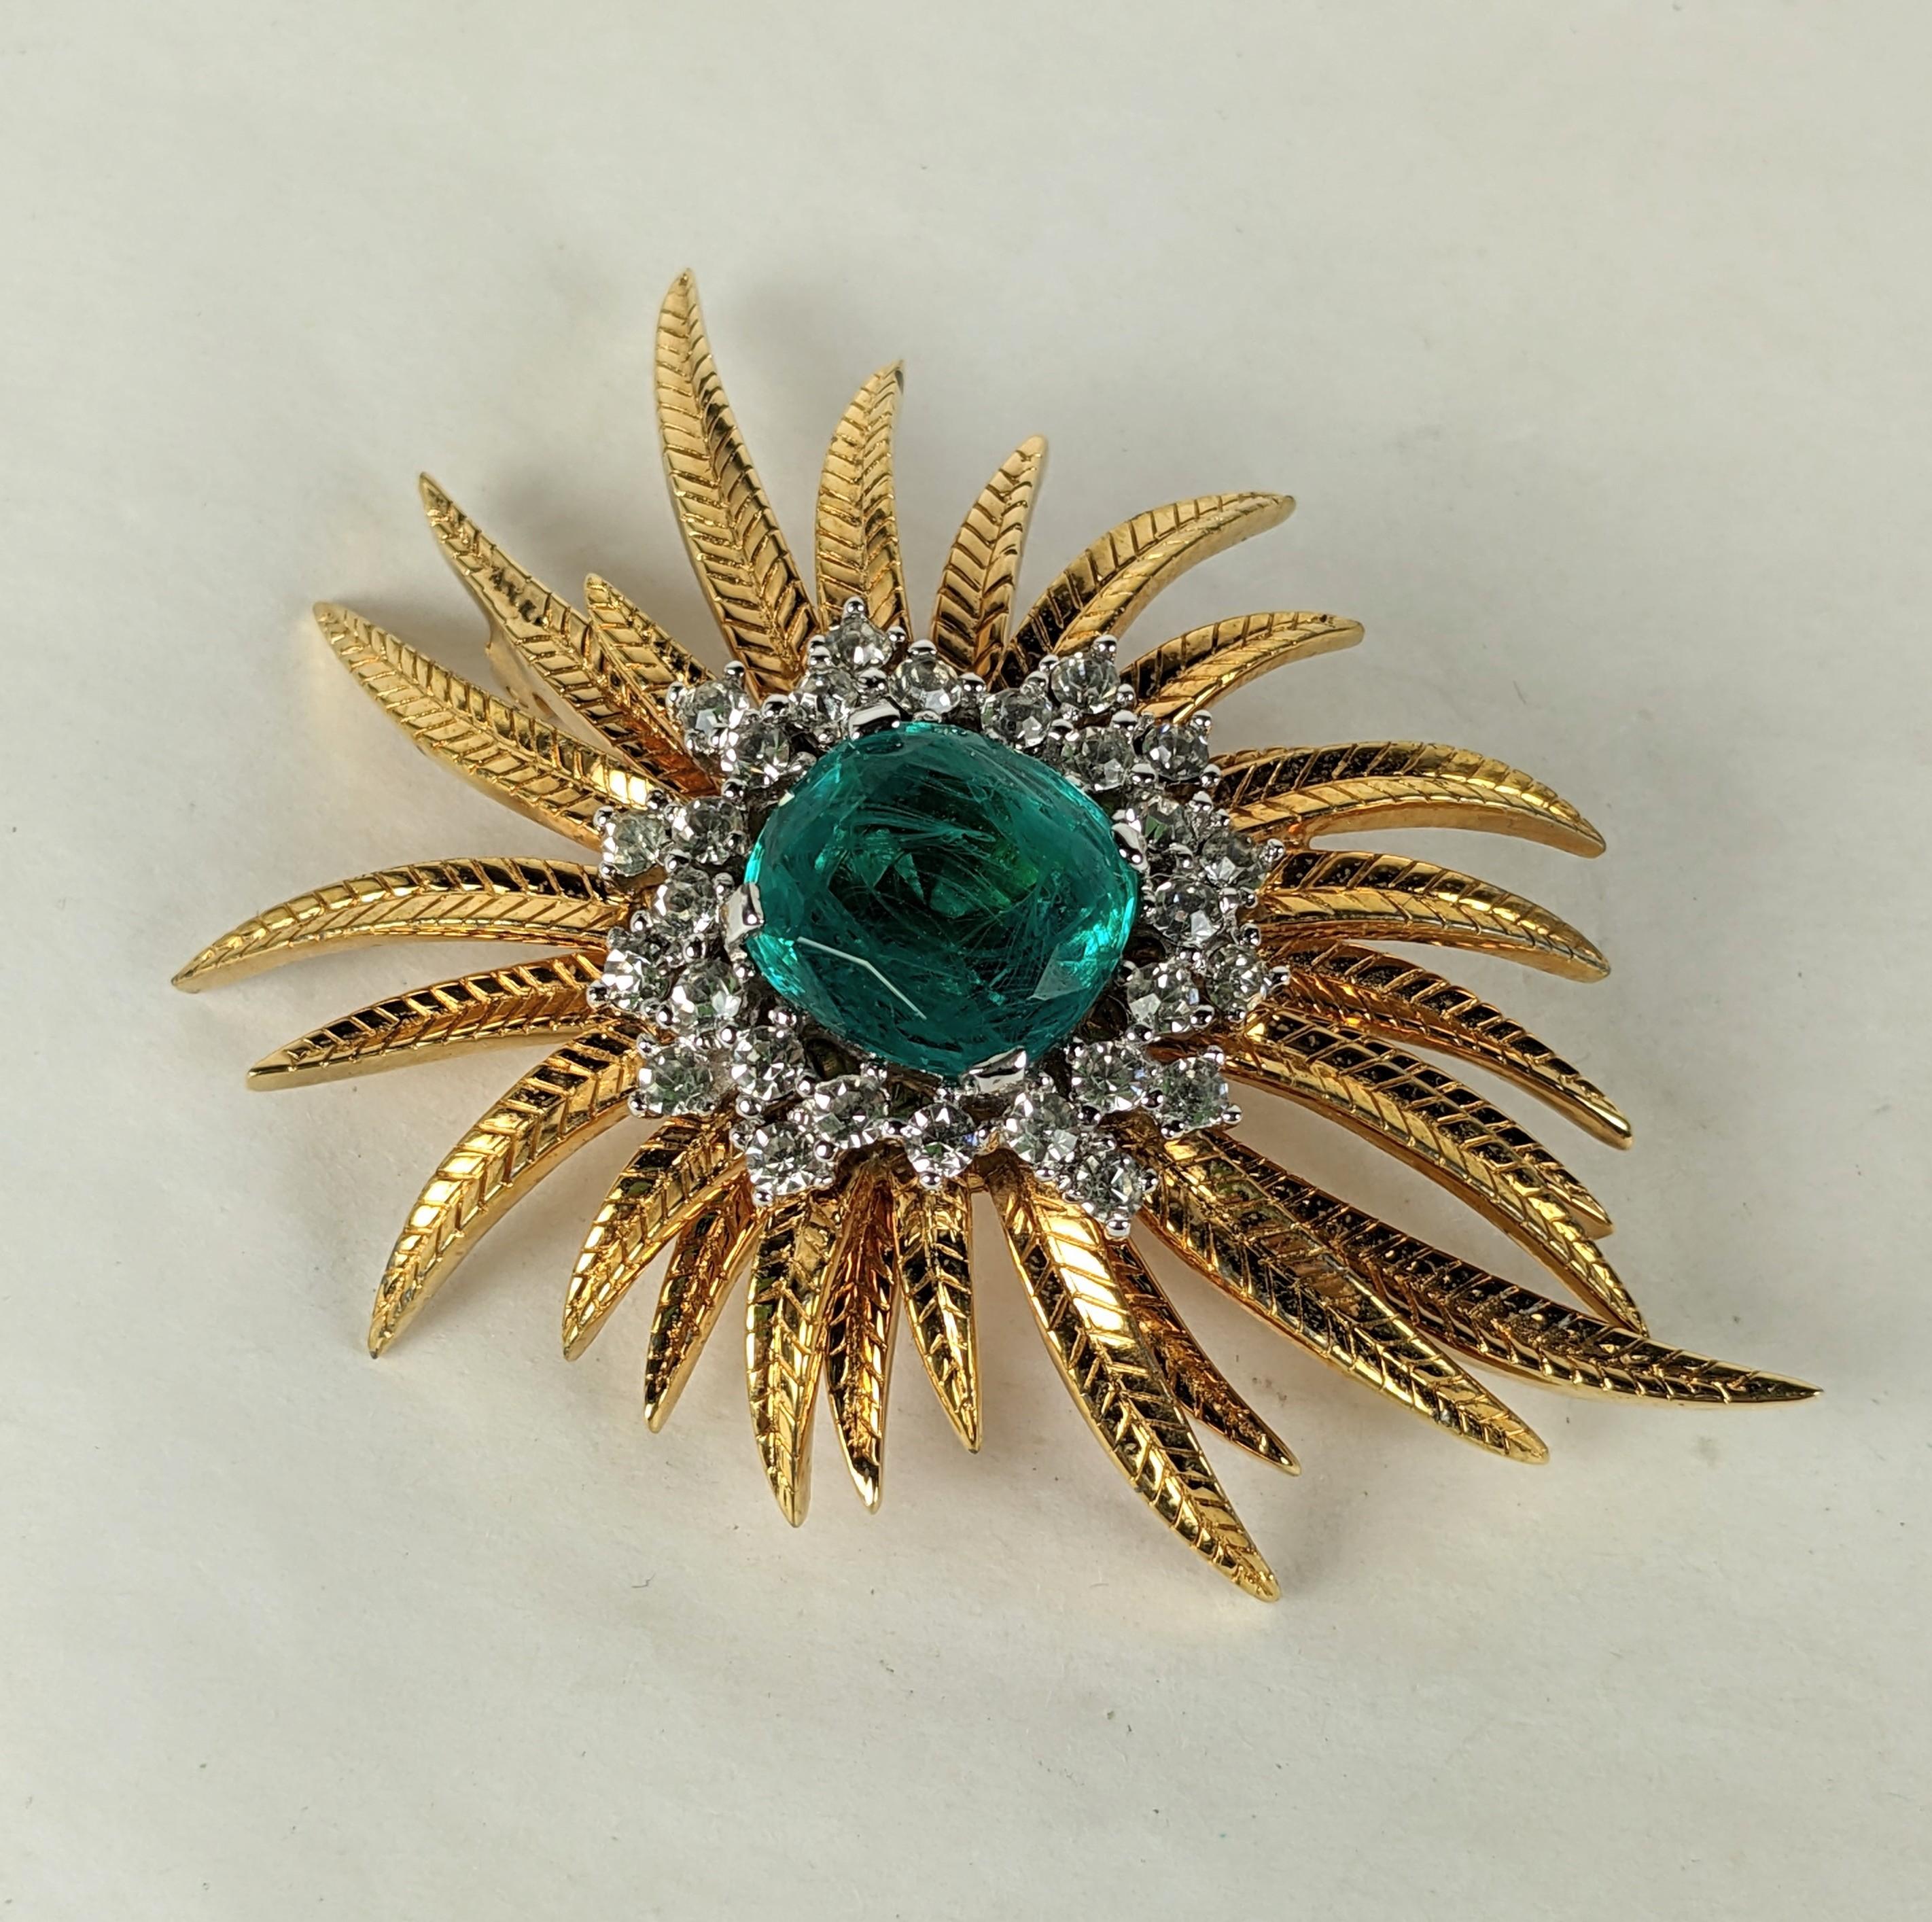 Elegant Faux Emerald and Diamond Plume Brooch from the 1960's in gilt metal. High quality, likely made by Polcini to replicate fine period jewelry. 1960's USA. 
2.75